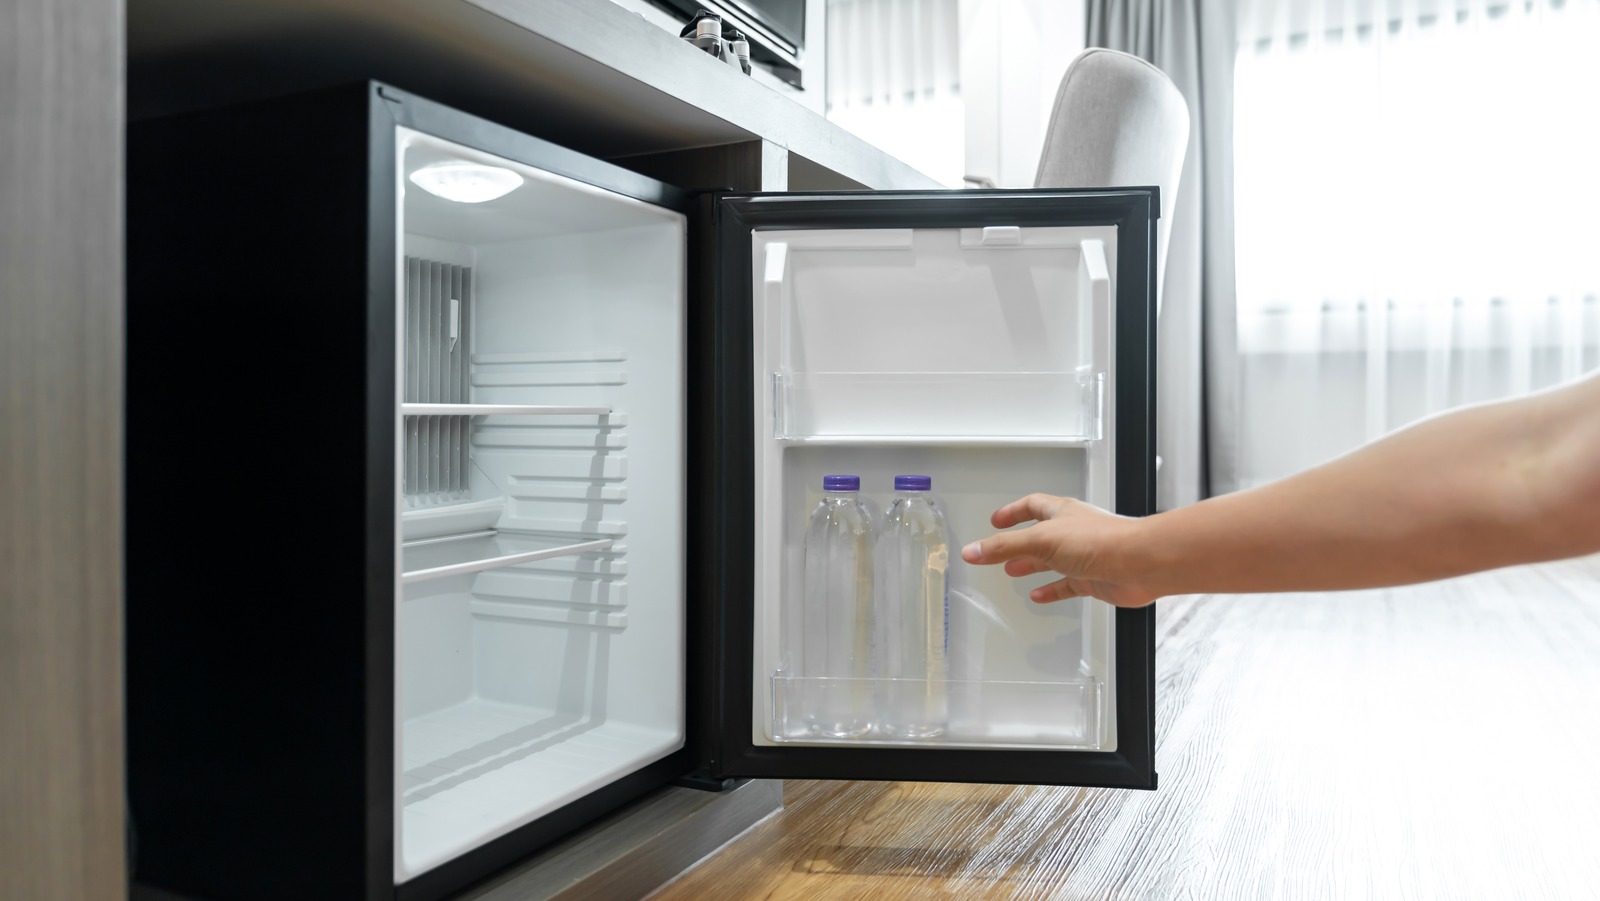 Your Hotel Mini Fridge Isn't Cold Enough to Store Leftovers